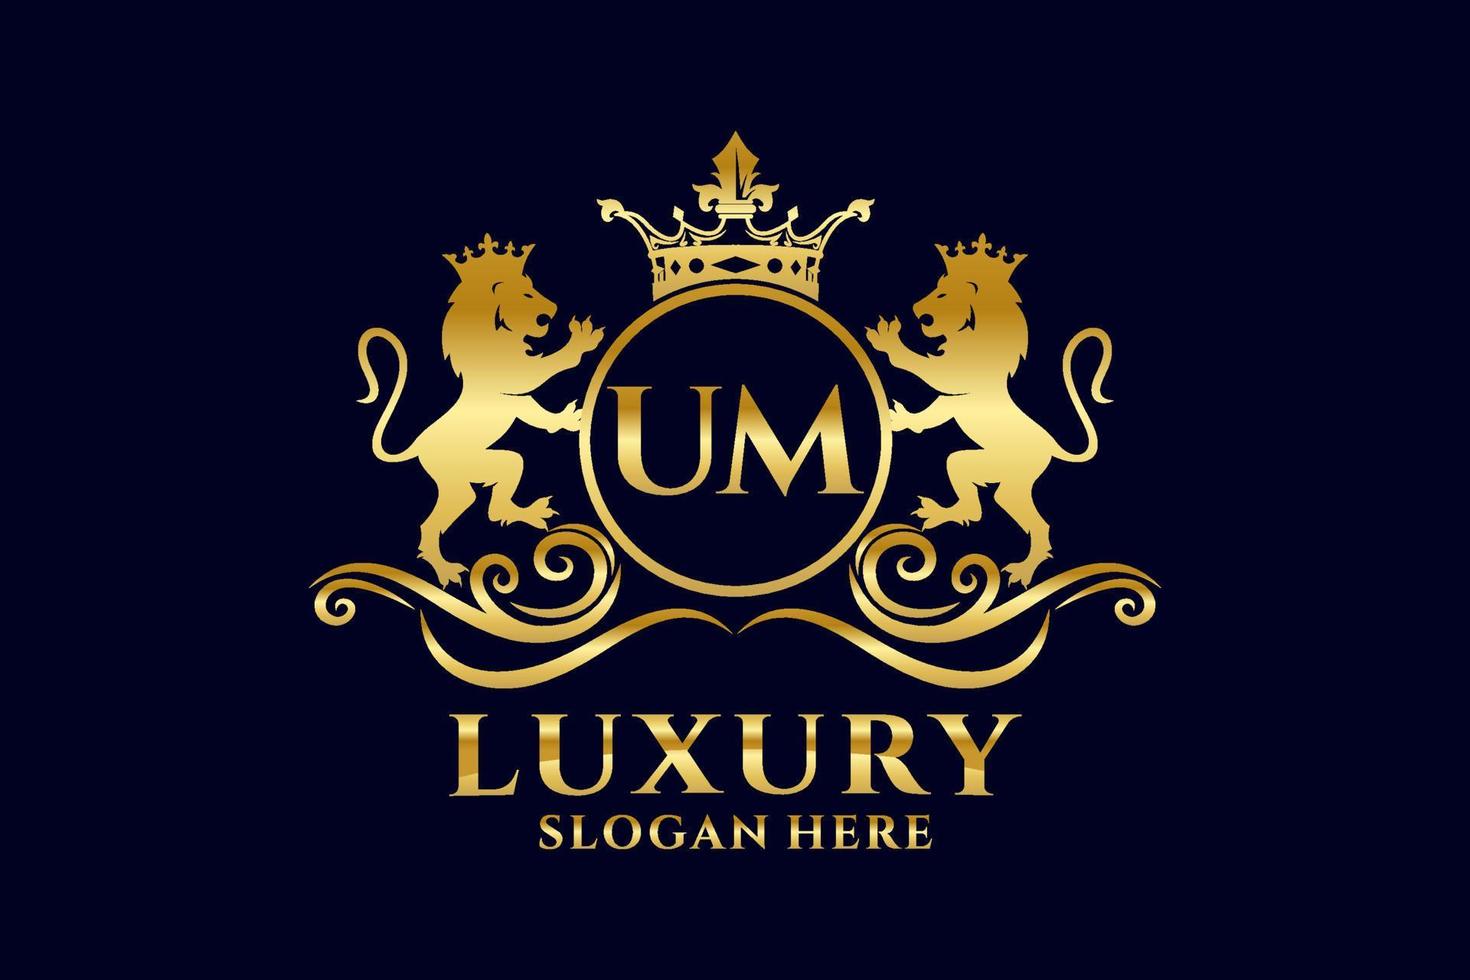 Initial UM Letter Lion Royal Luxury Logo template in vector art for luxurious branding projects and other vector illustration.